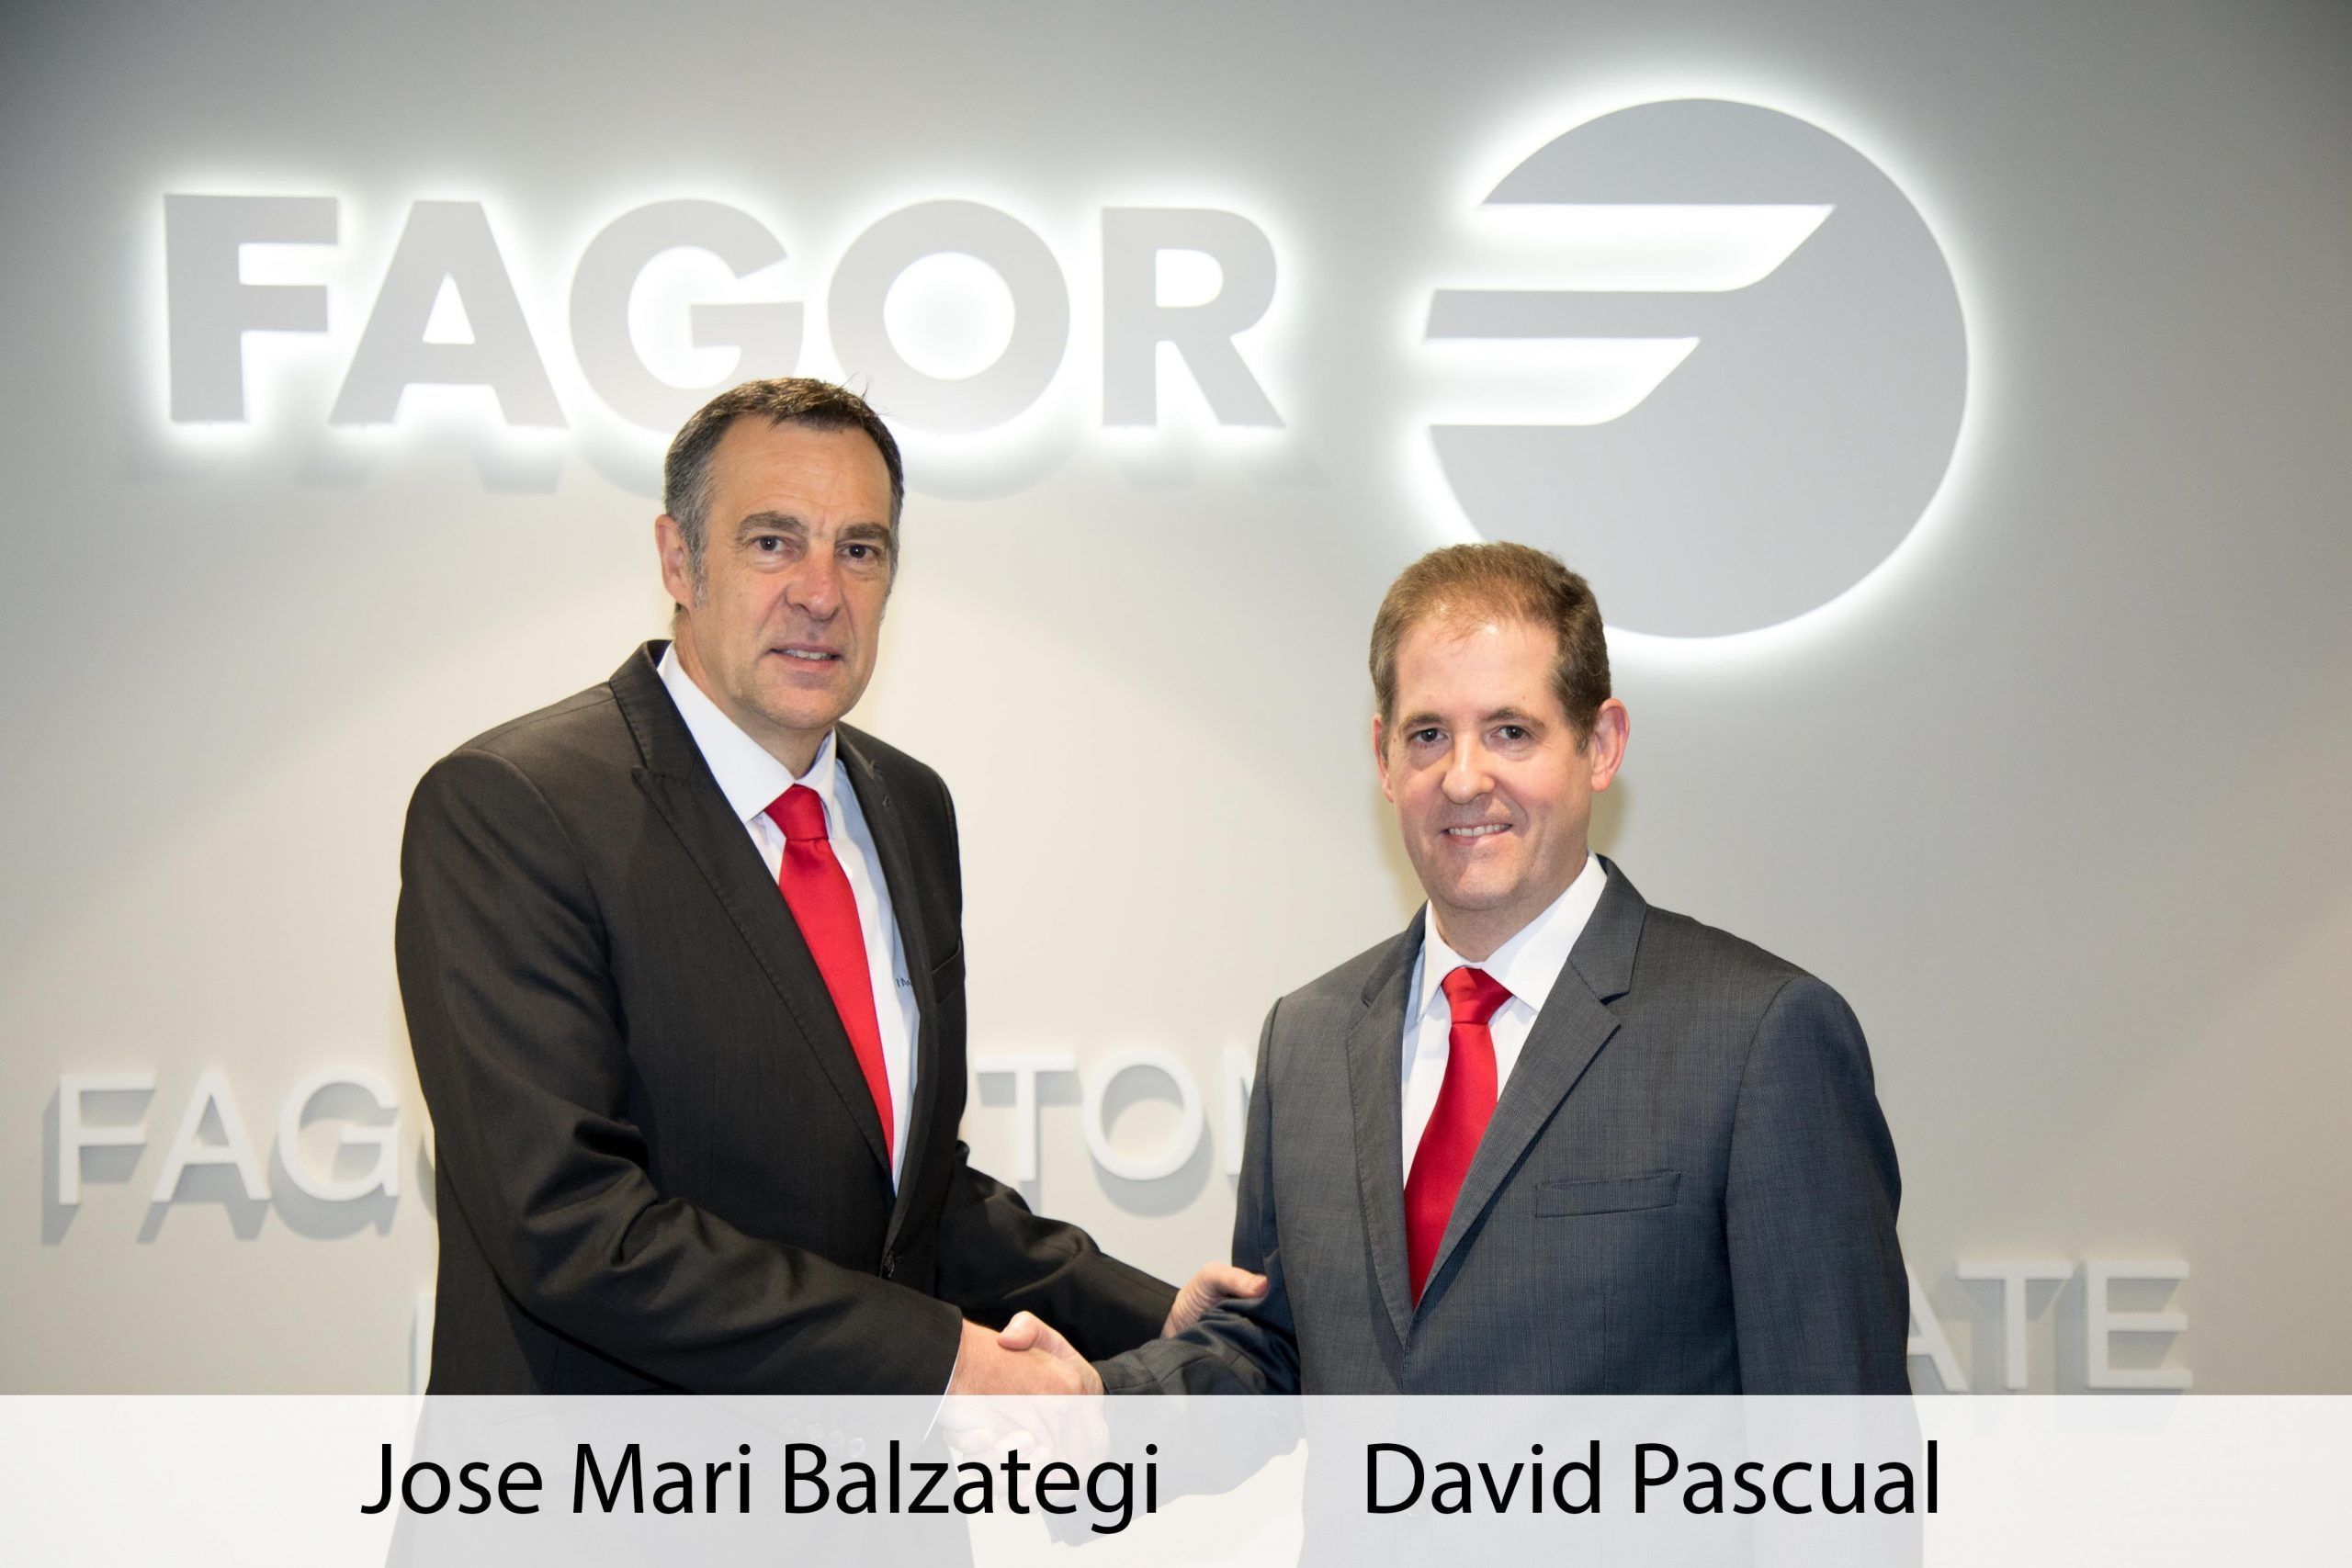 Fagor Arrasate event: David Pascual, appointed new General Manager of Fagor Arrasate S. Coop.